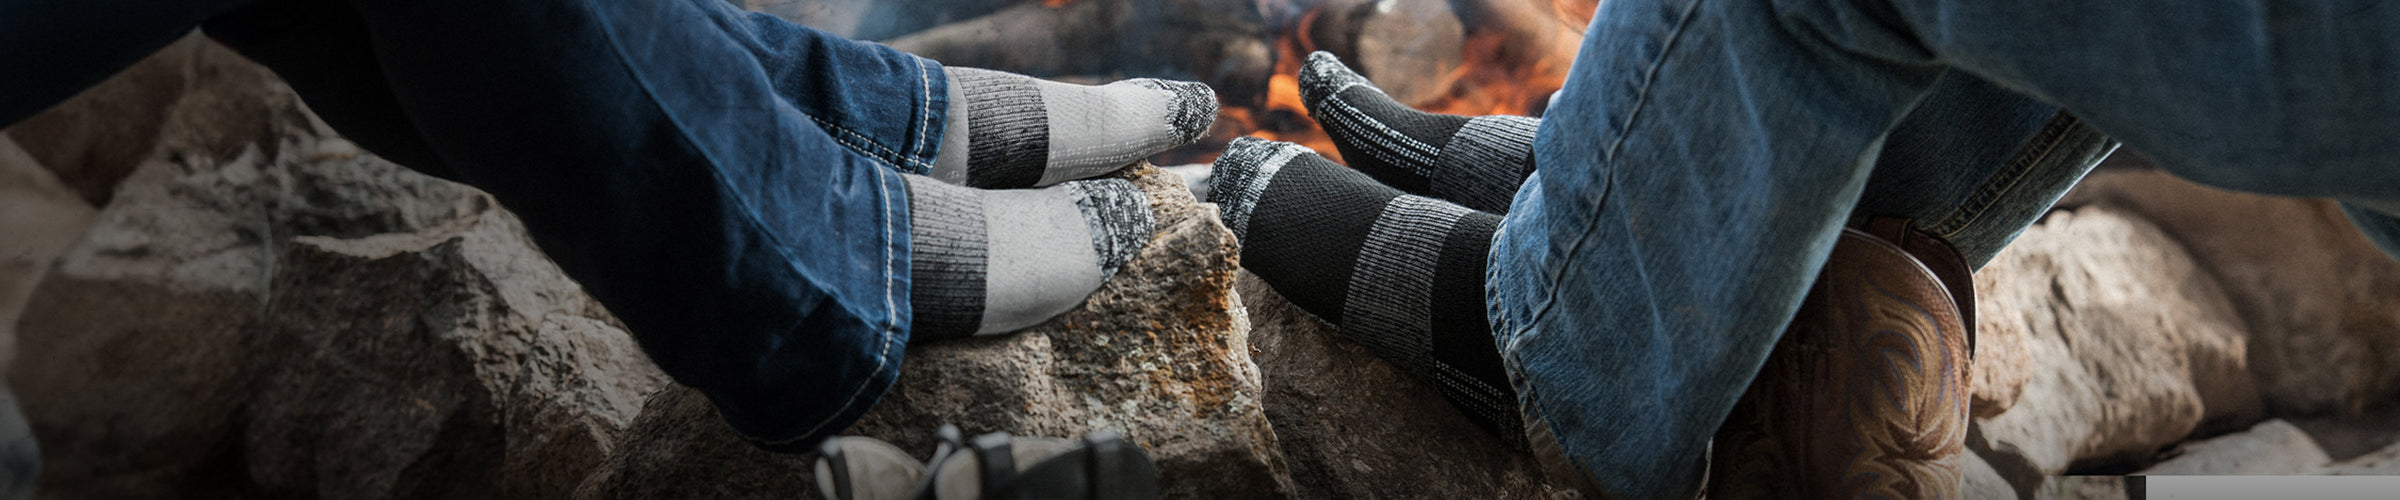 two people without shoes on warming their socks in front of a fire